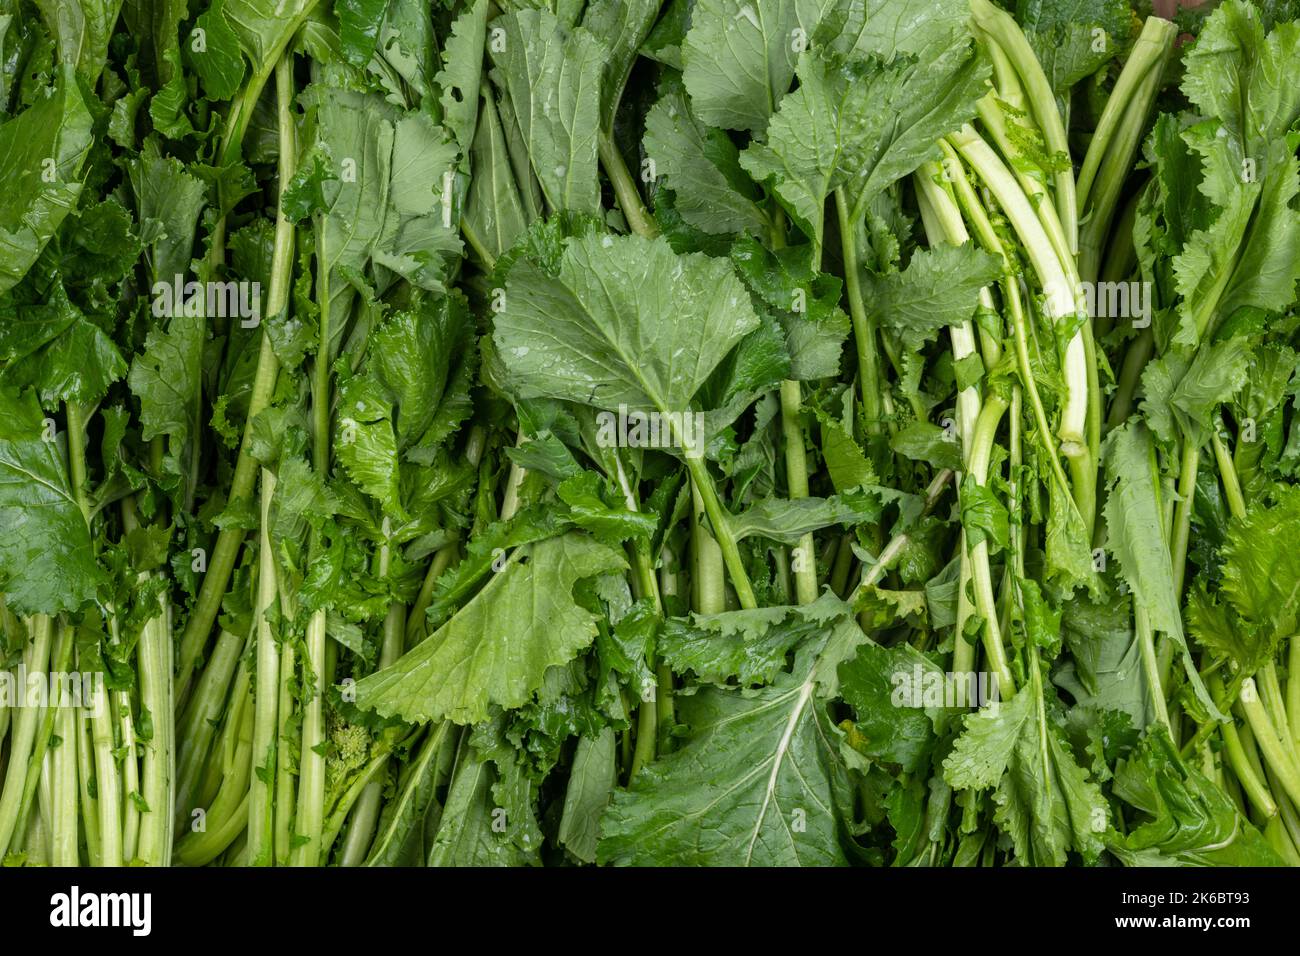 Celery veggie ingredient plant for cooking Stock Photo